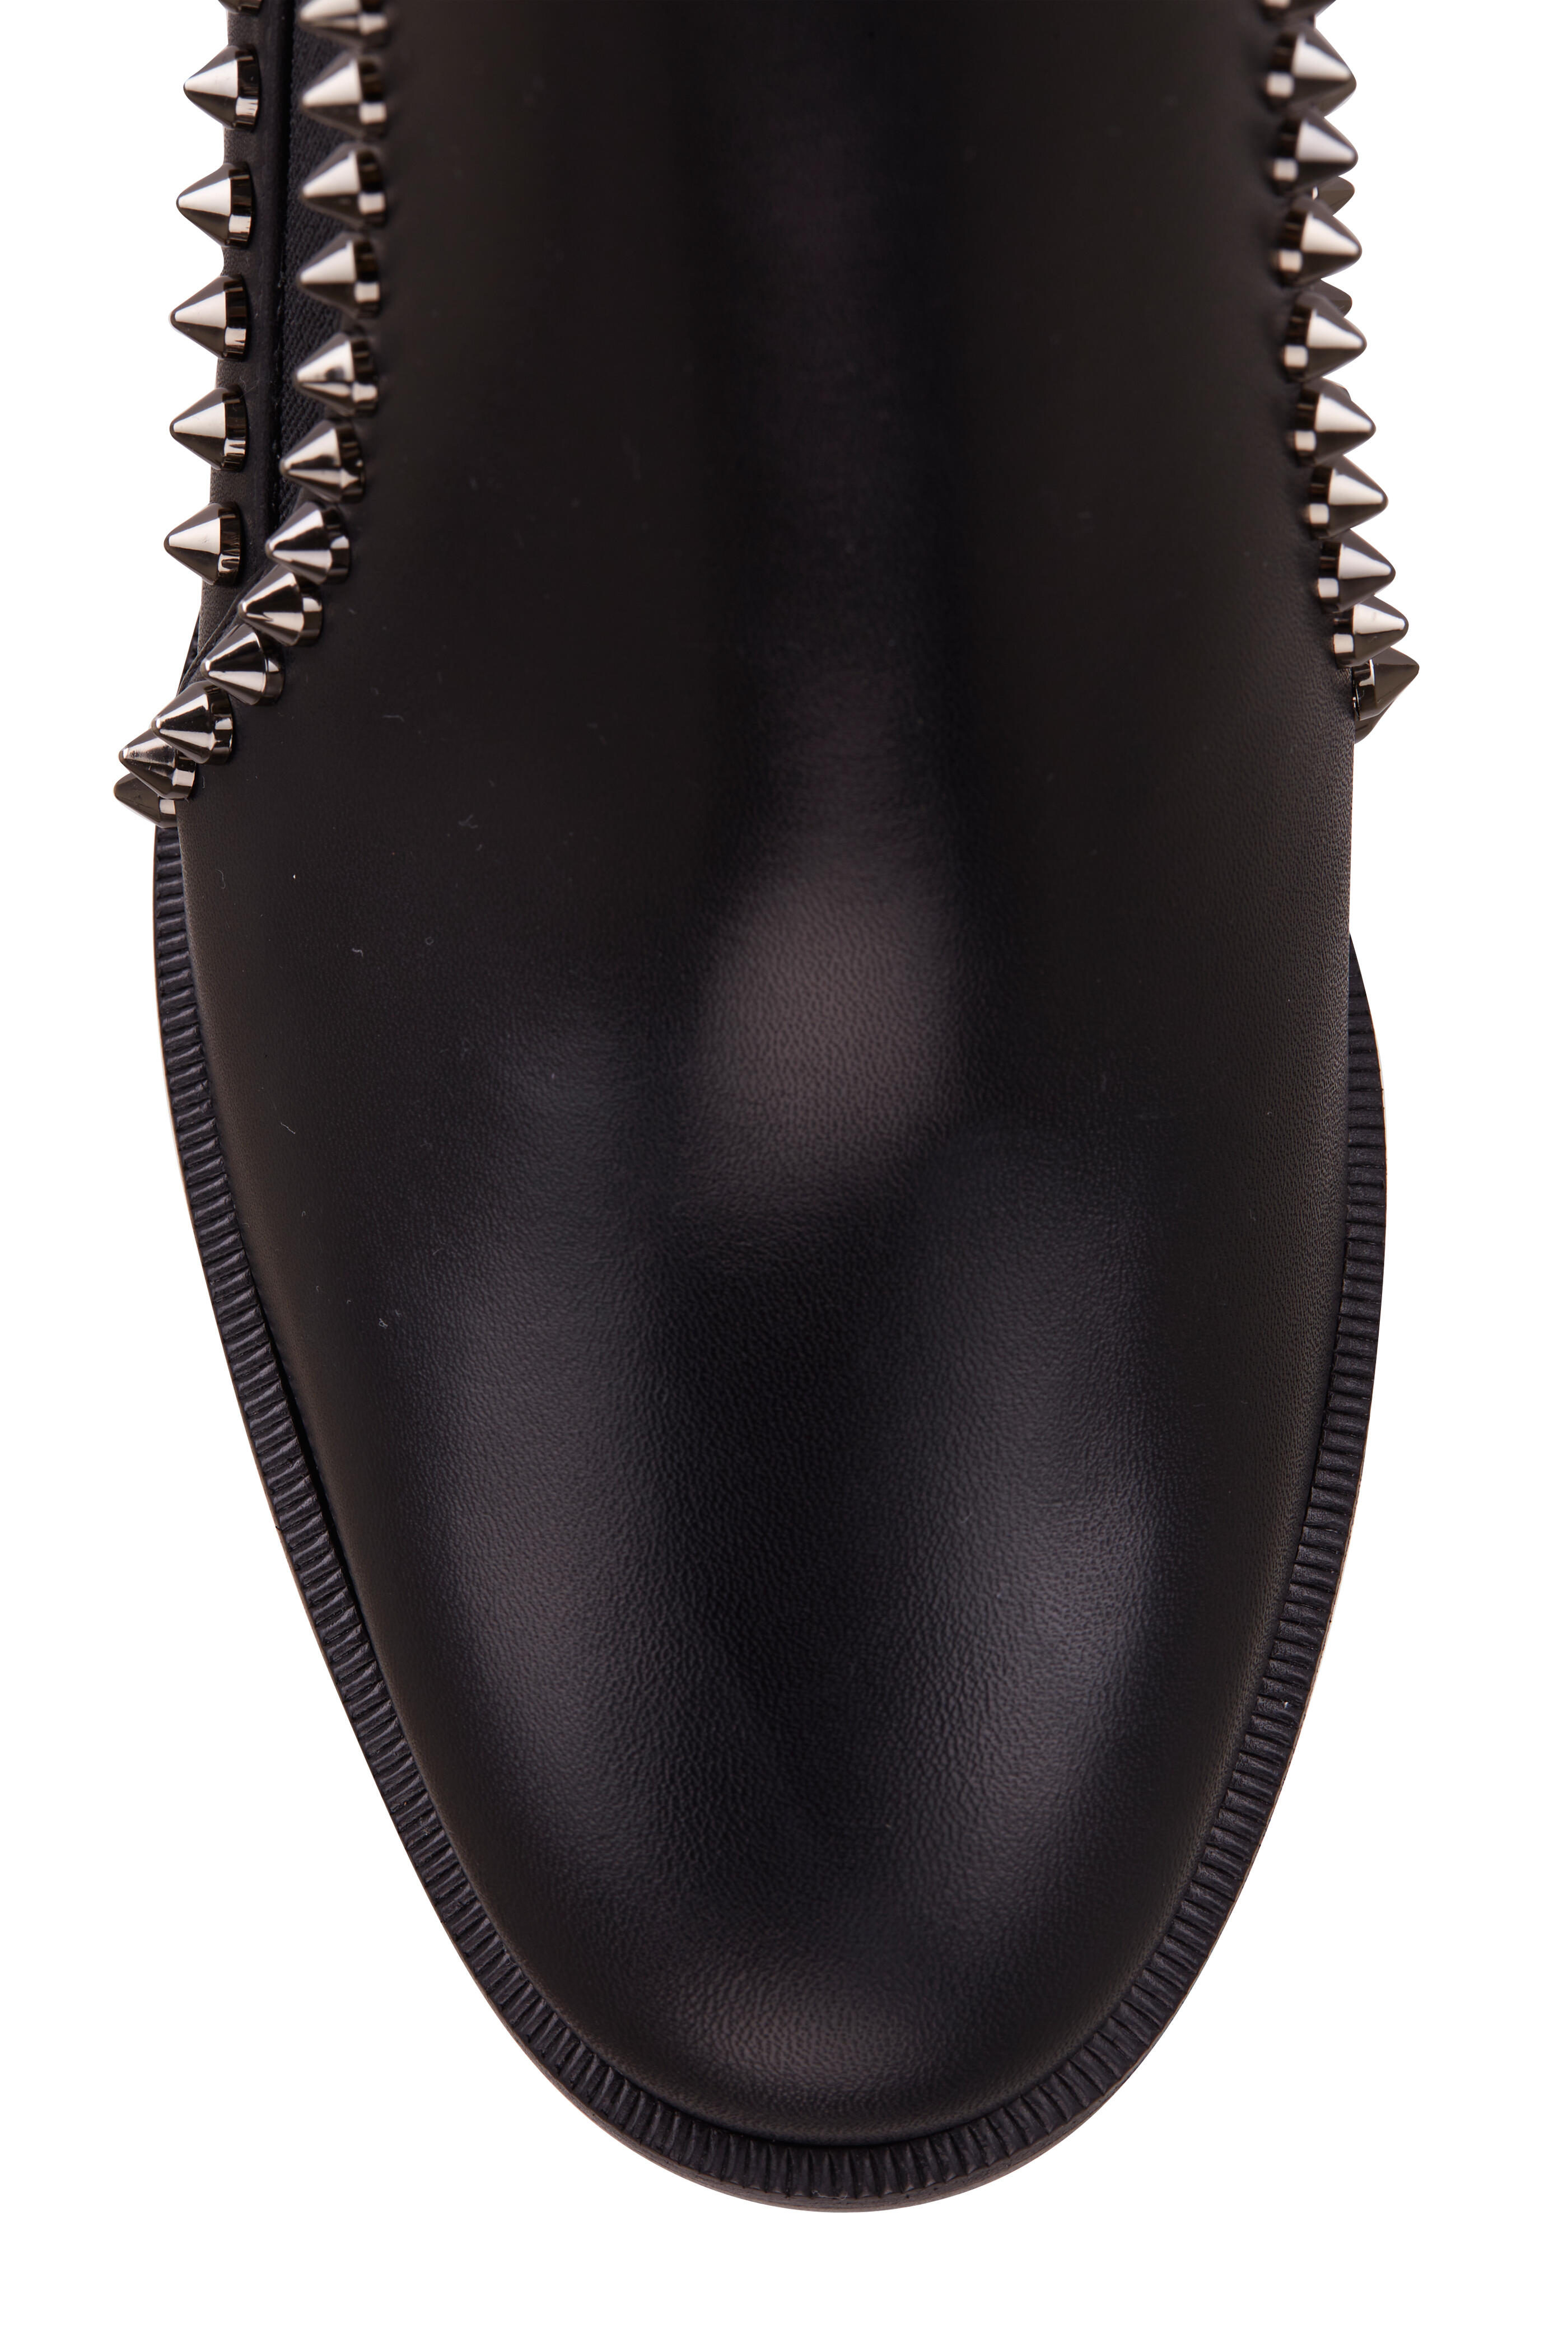 Christian Louboutin Out Line Spike Lug Leather Ankle Boots 70